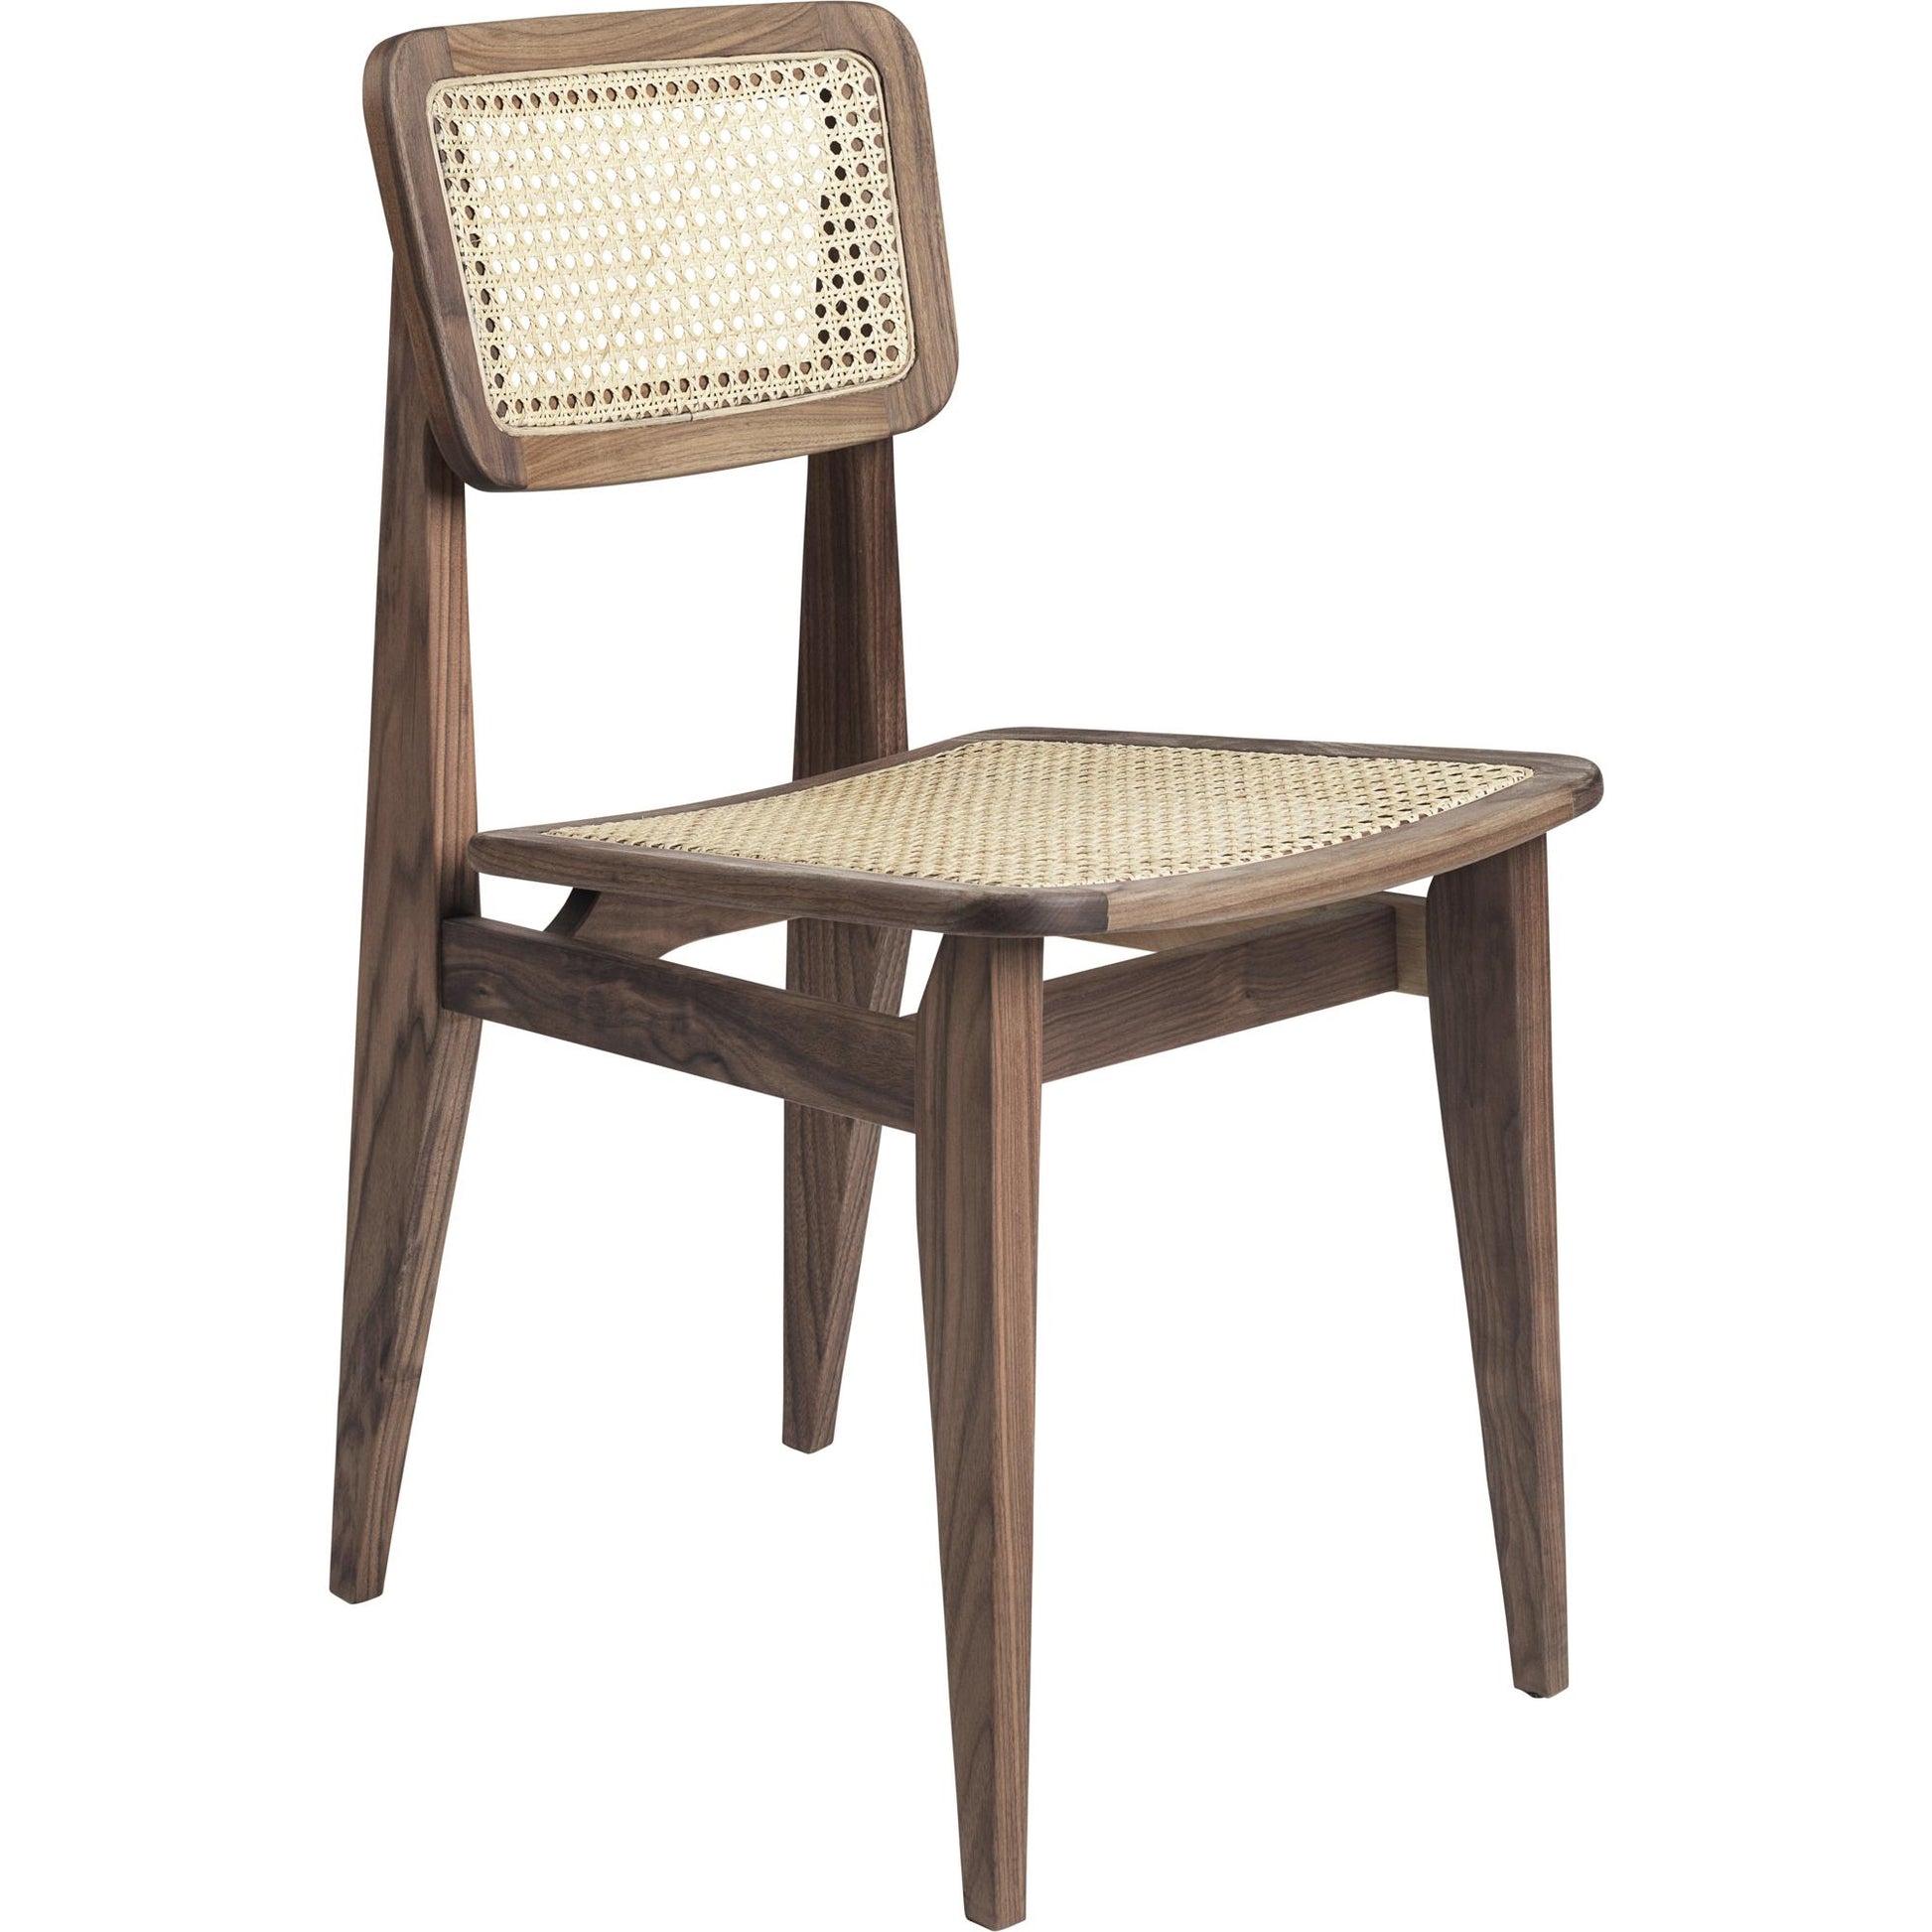 C-Chair Dining Chair by GUBI #French Wicker/American Walnut